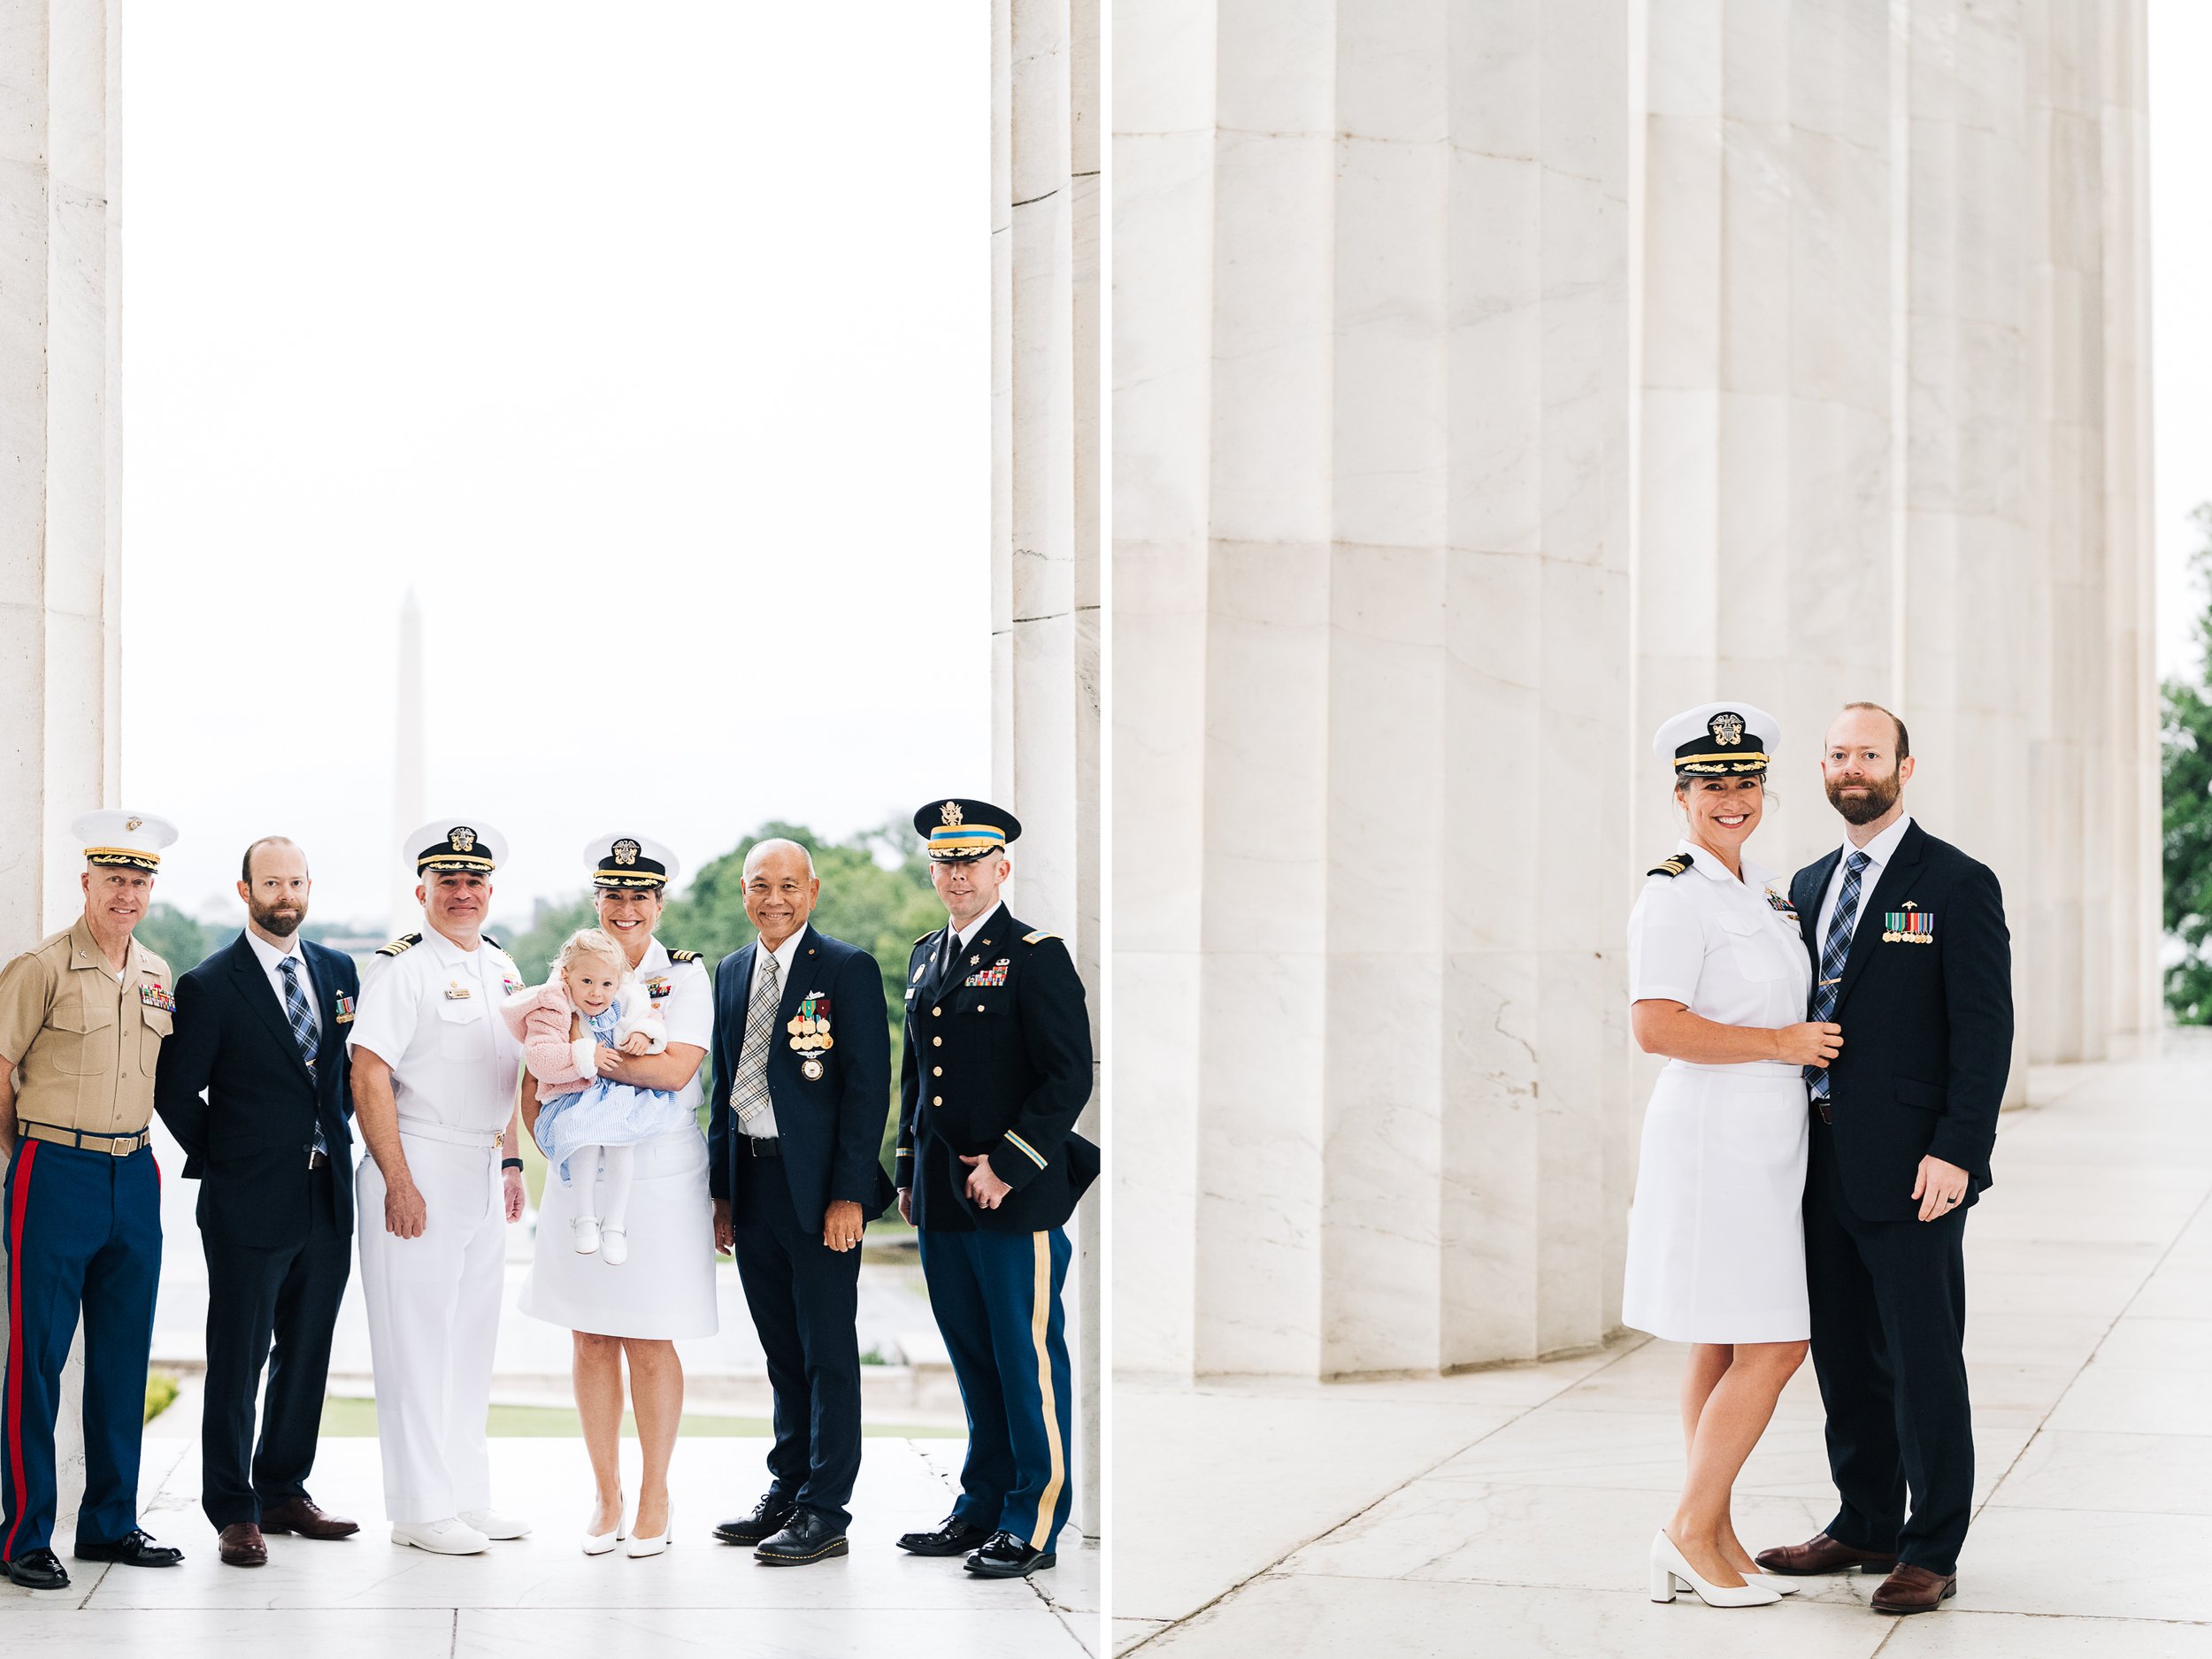  military ceremony at Lincoln Memorial in Washington DC 